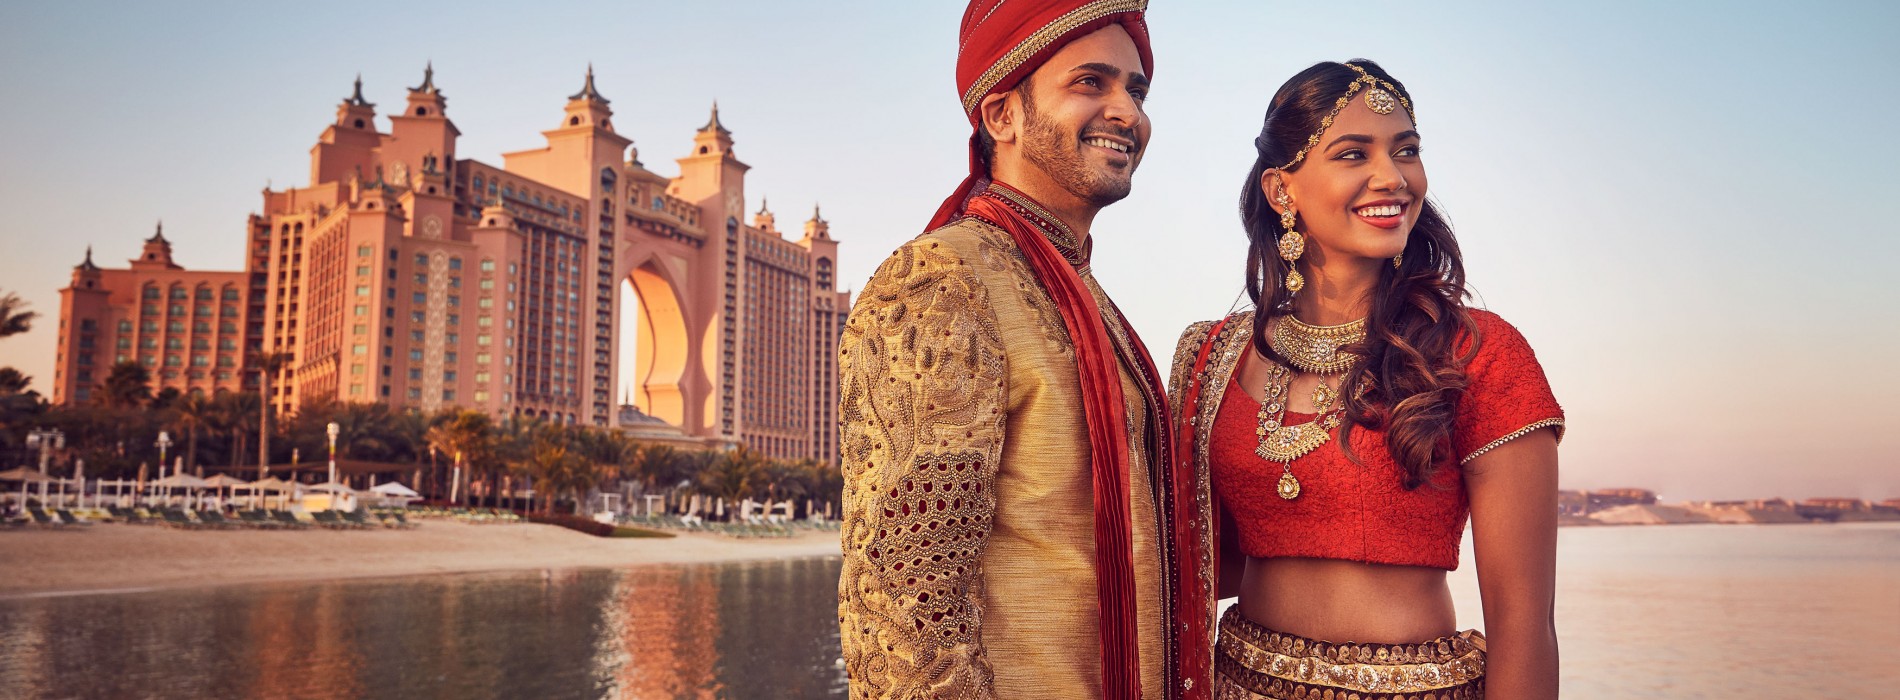 Atlantis The Palm launches the wedding lounge